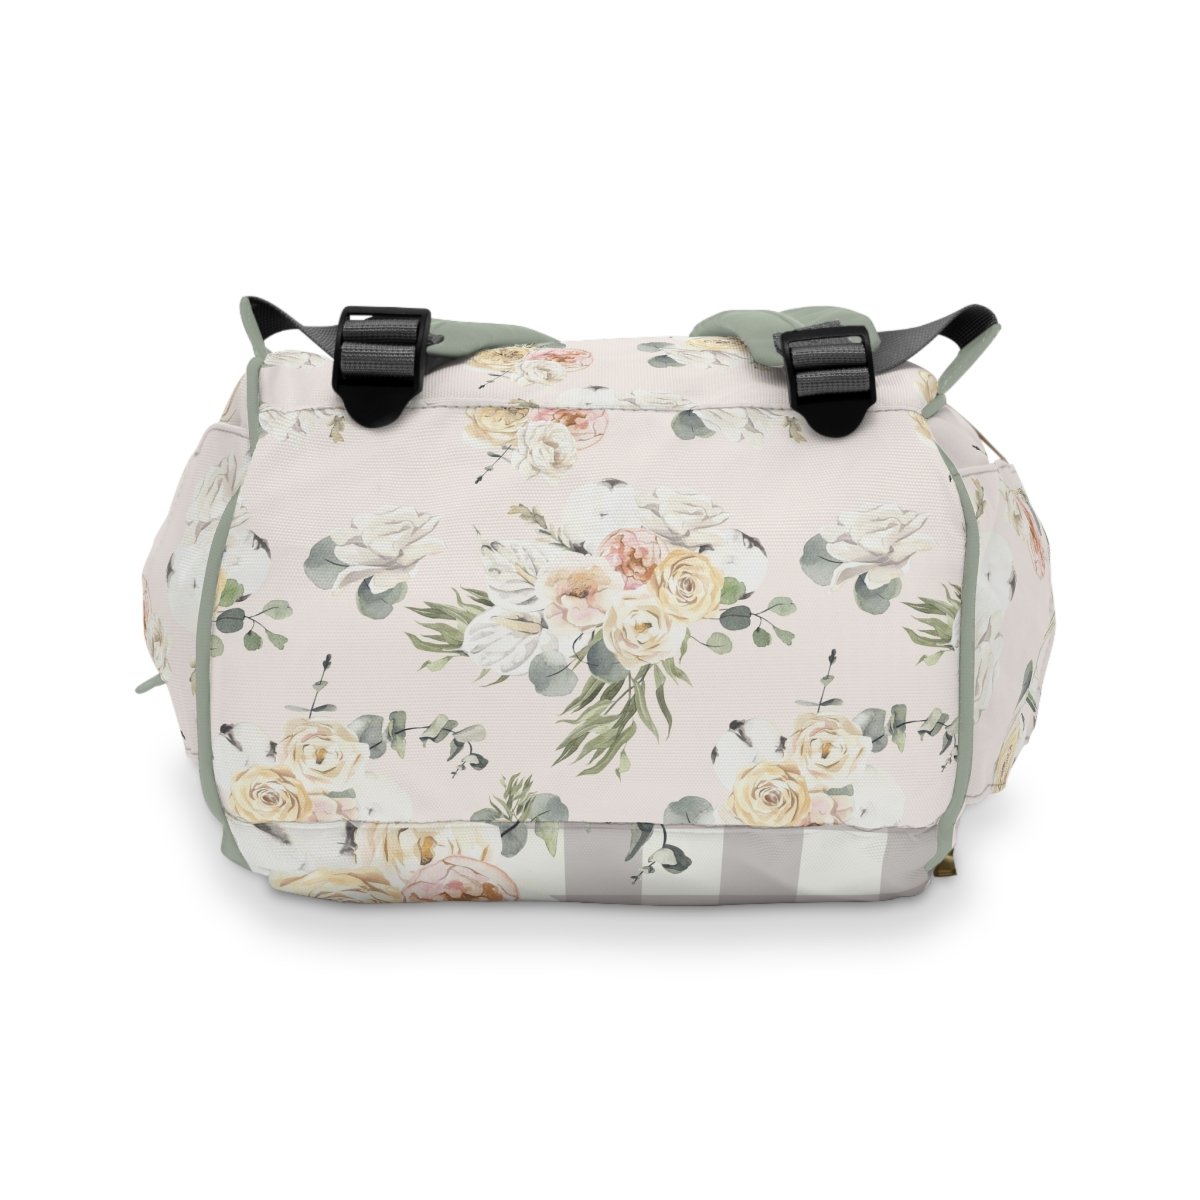 Farmhouse Floral Personalized Backpack Diaper Bag - Backpack